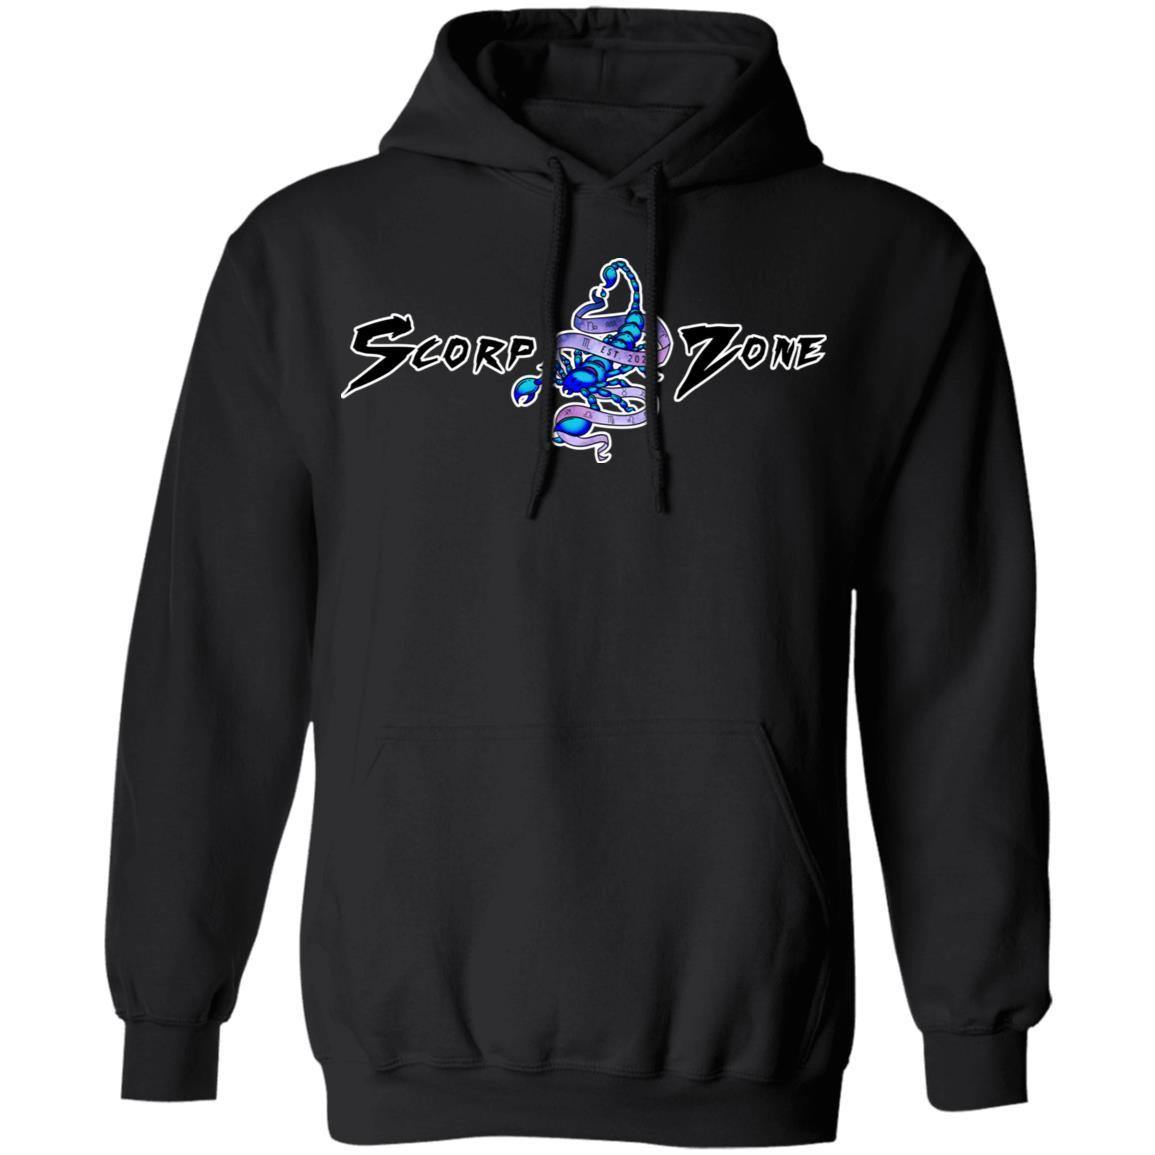 GEMINI DESIGN ON BACK AND SMALL SCORP ZONE LOGO ON FRONT - Z66 Pullover Hoodie - ScorpZone